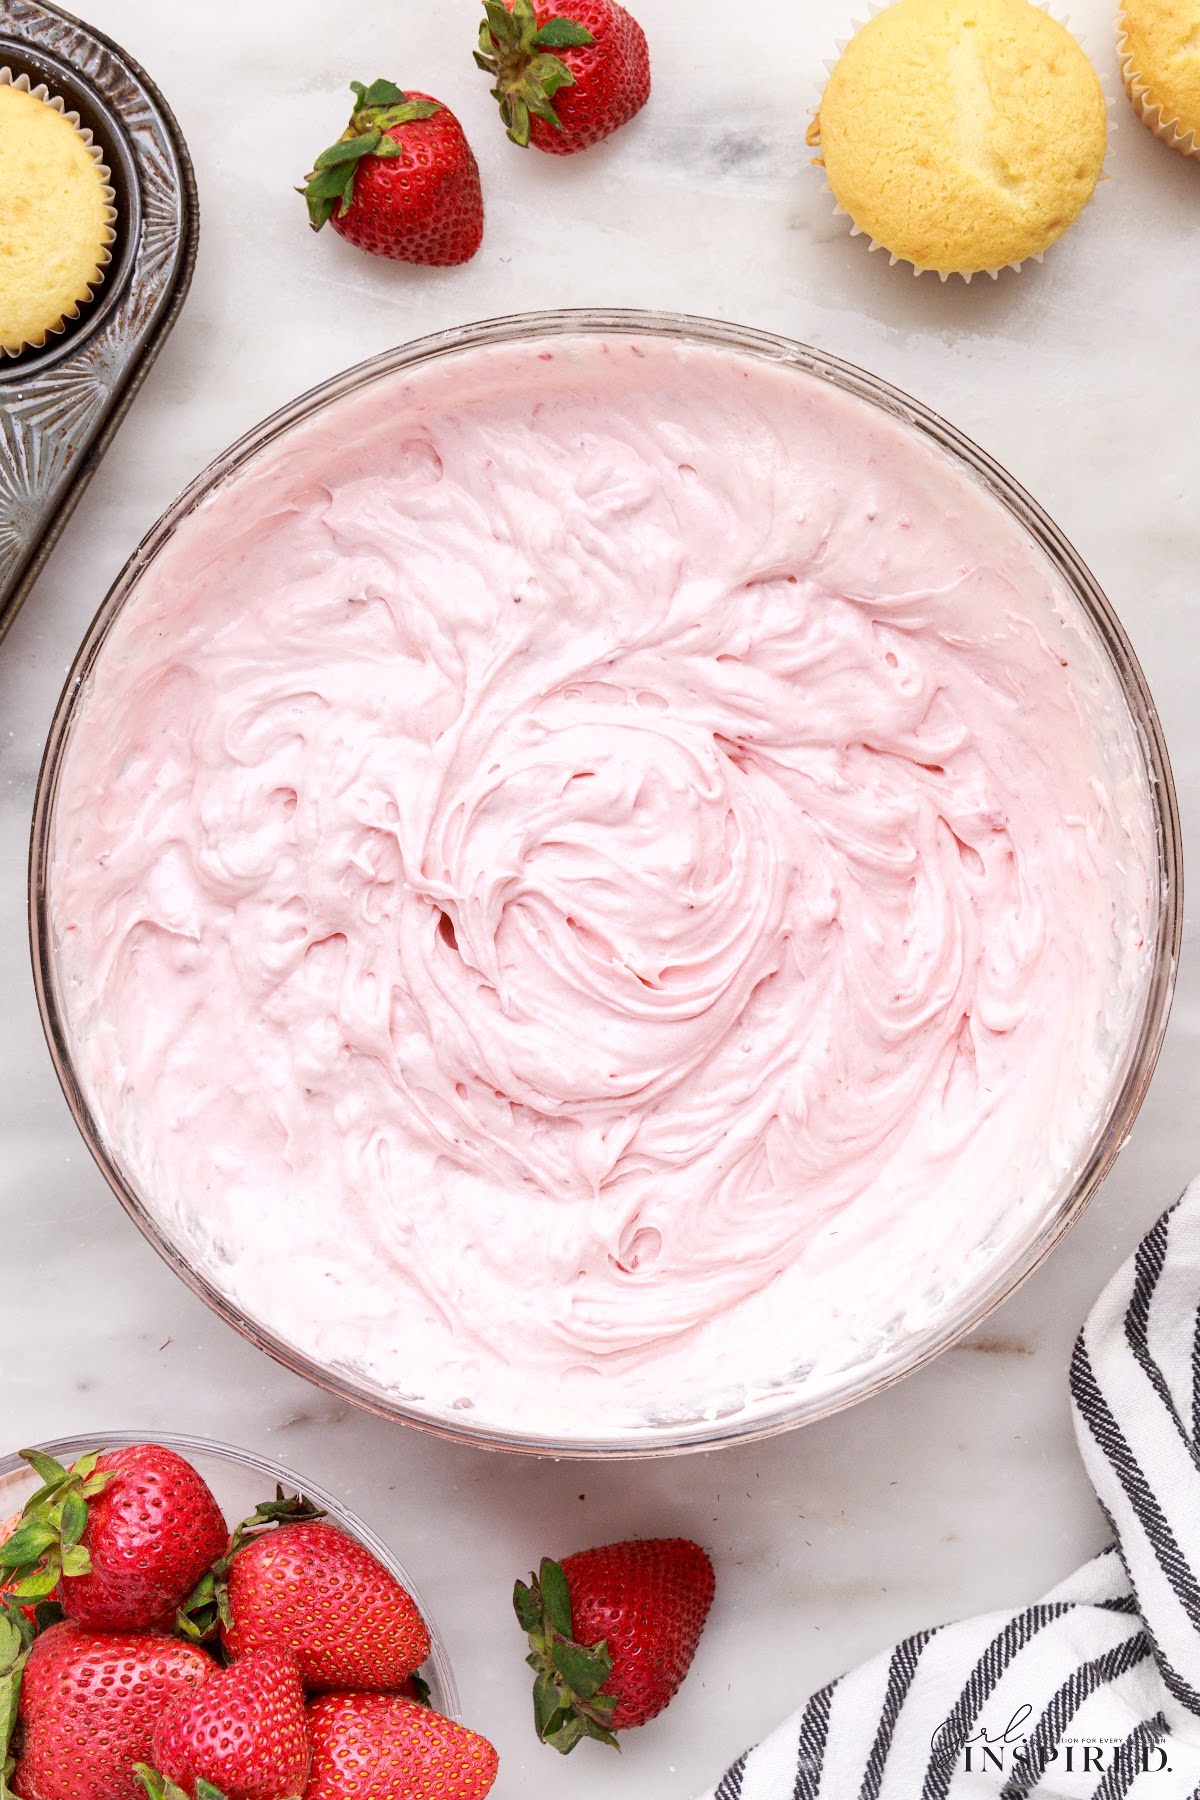 Large glass bowl of strawberry cream cheese frosting with cupcakes and whole strawberries scattered around.